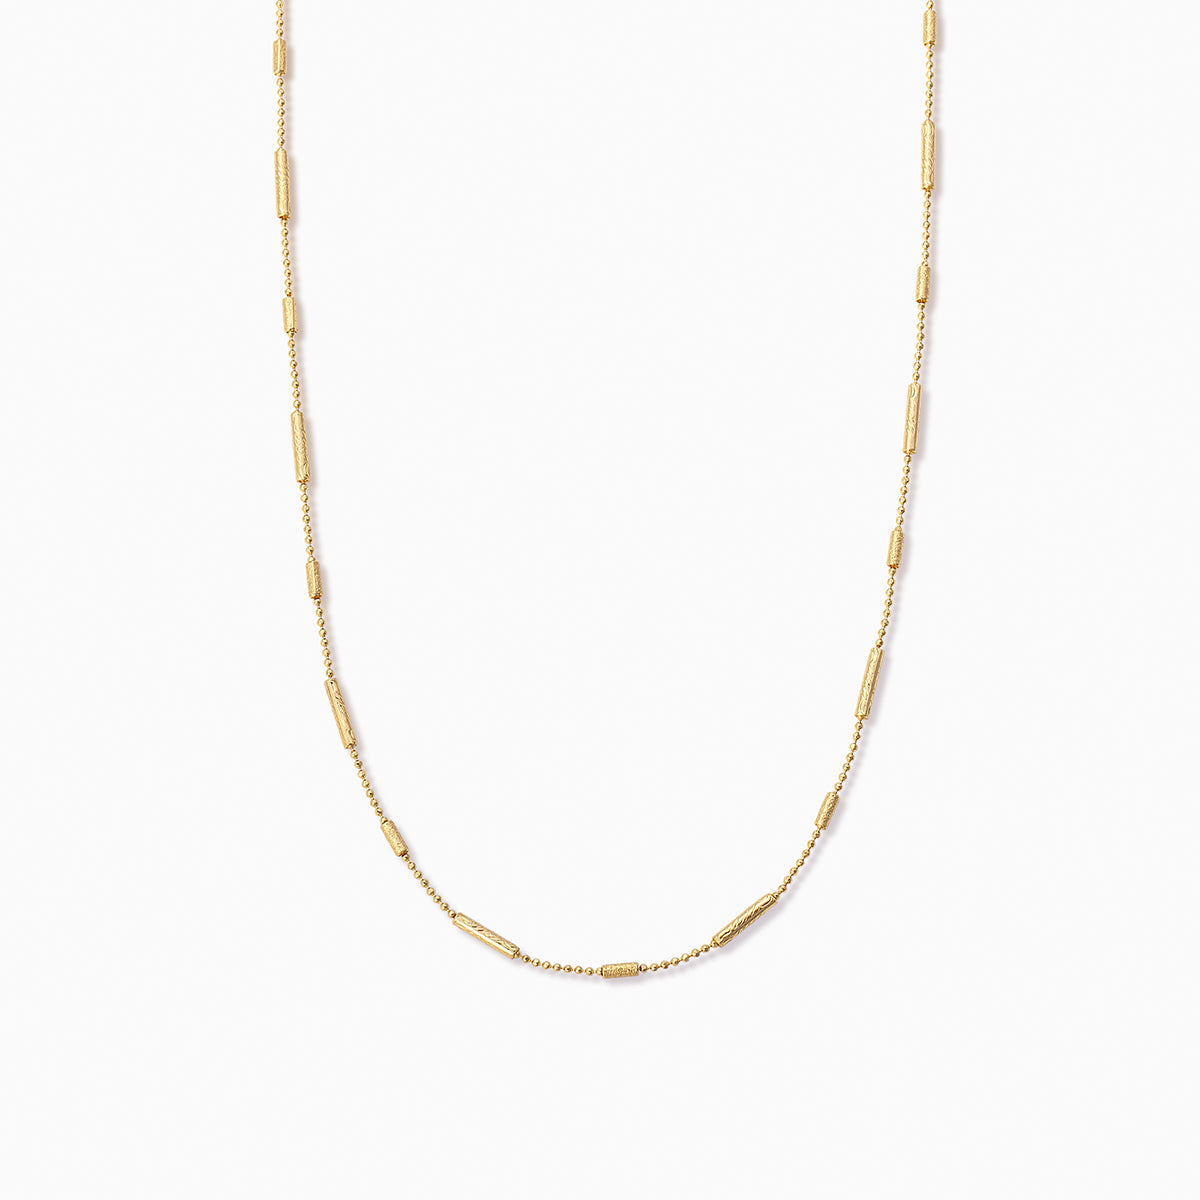 Ready to Mingle 2.0 | Gold | Product Image | Uncommon James